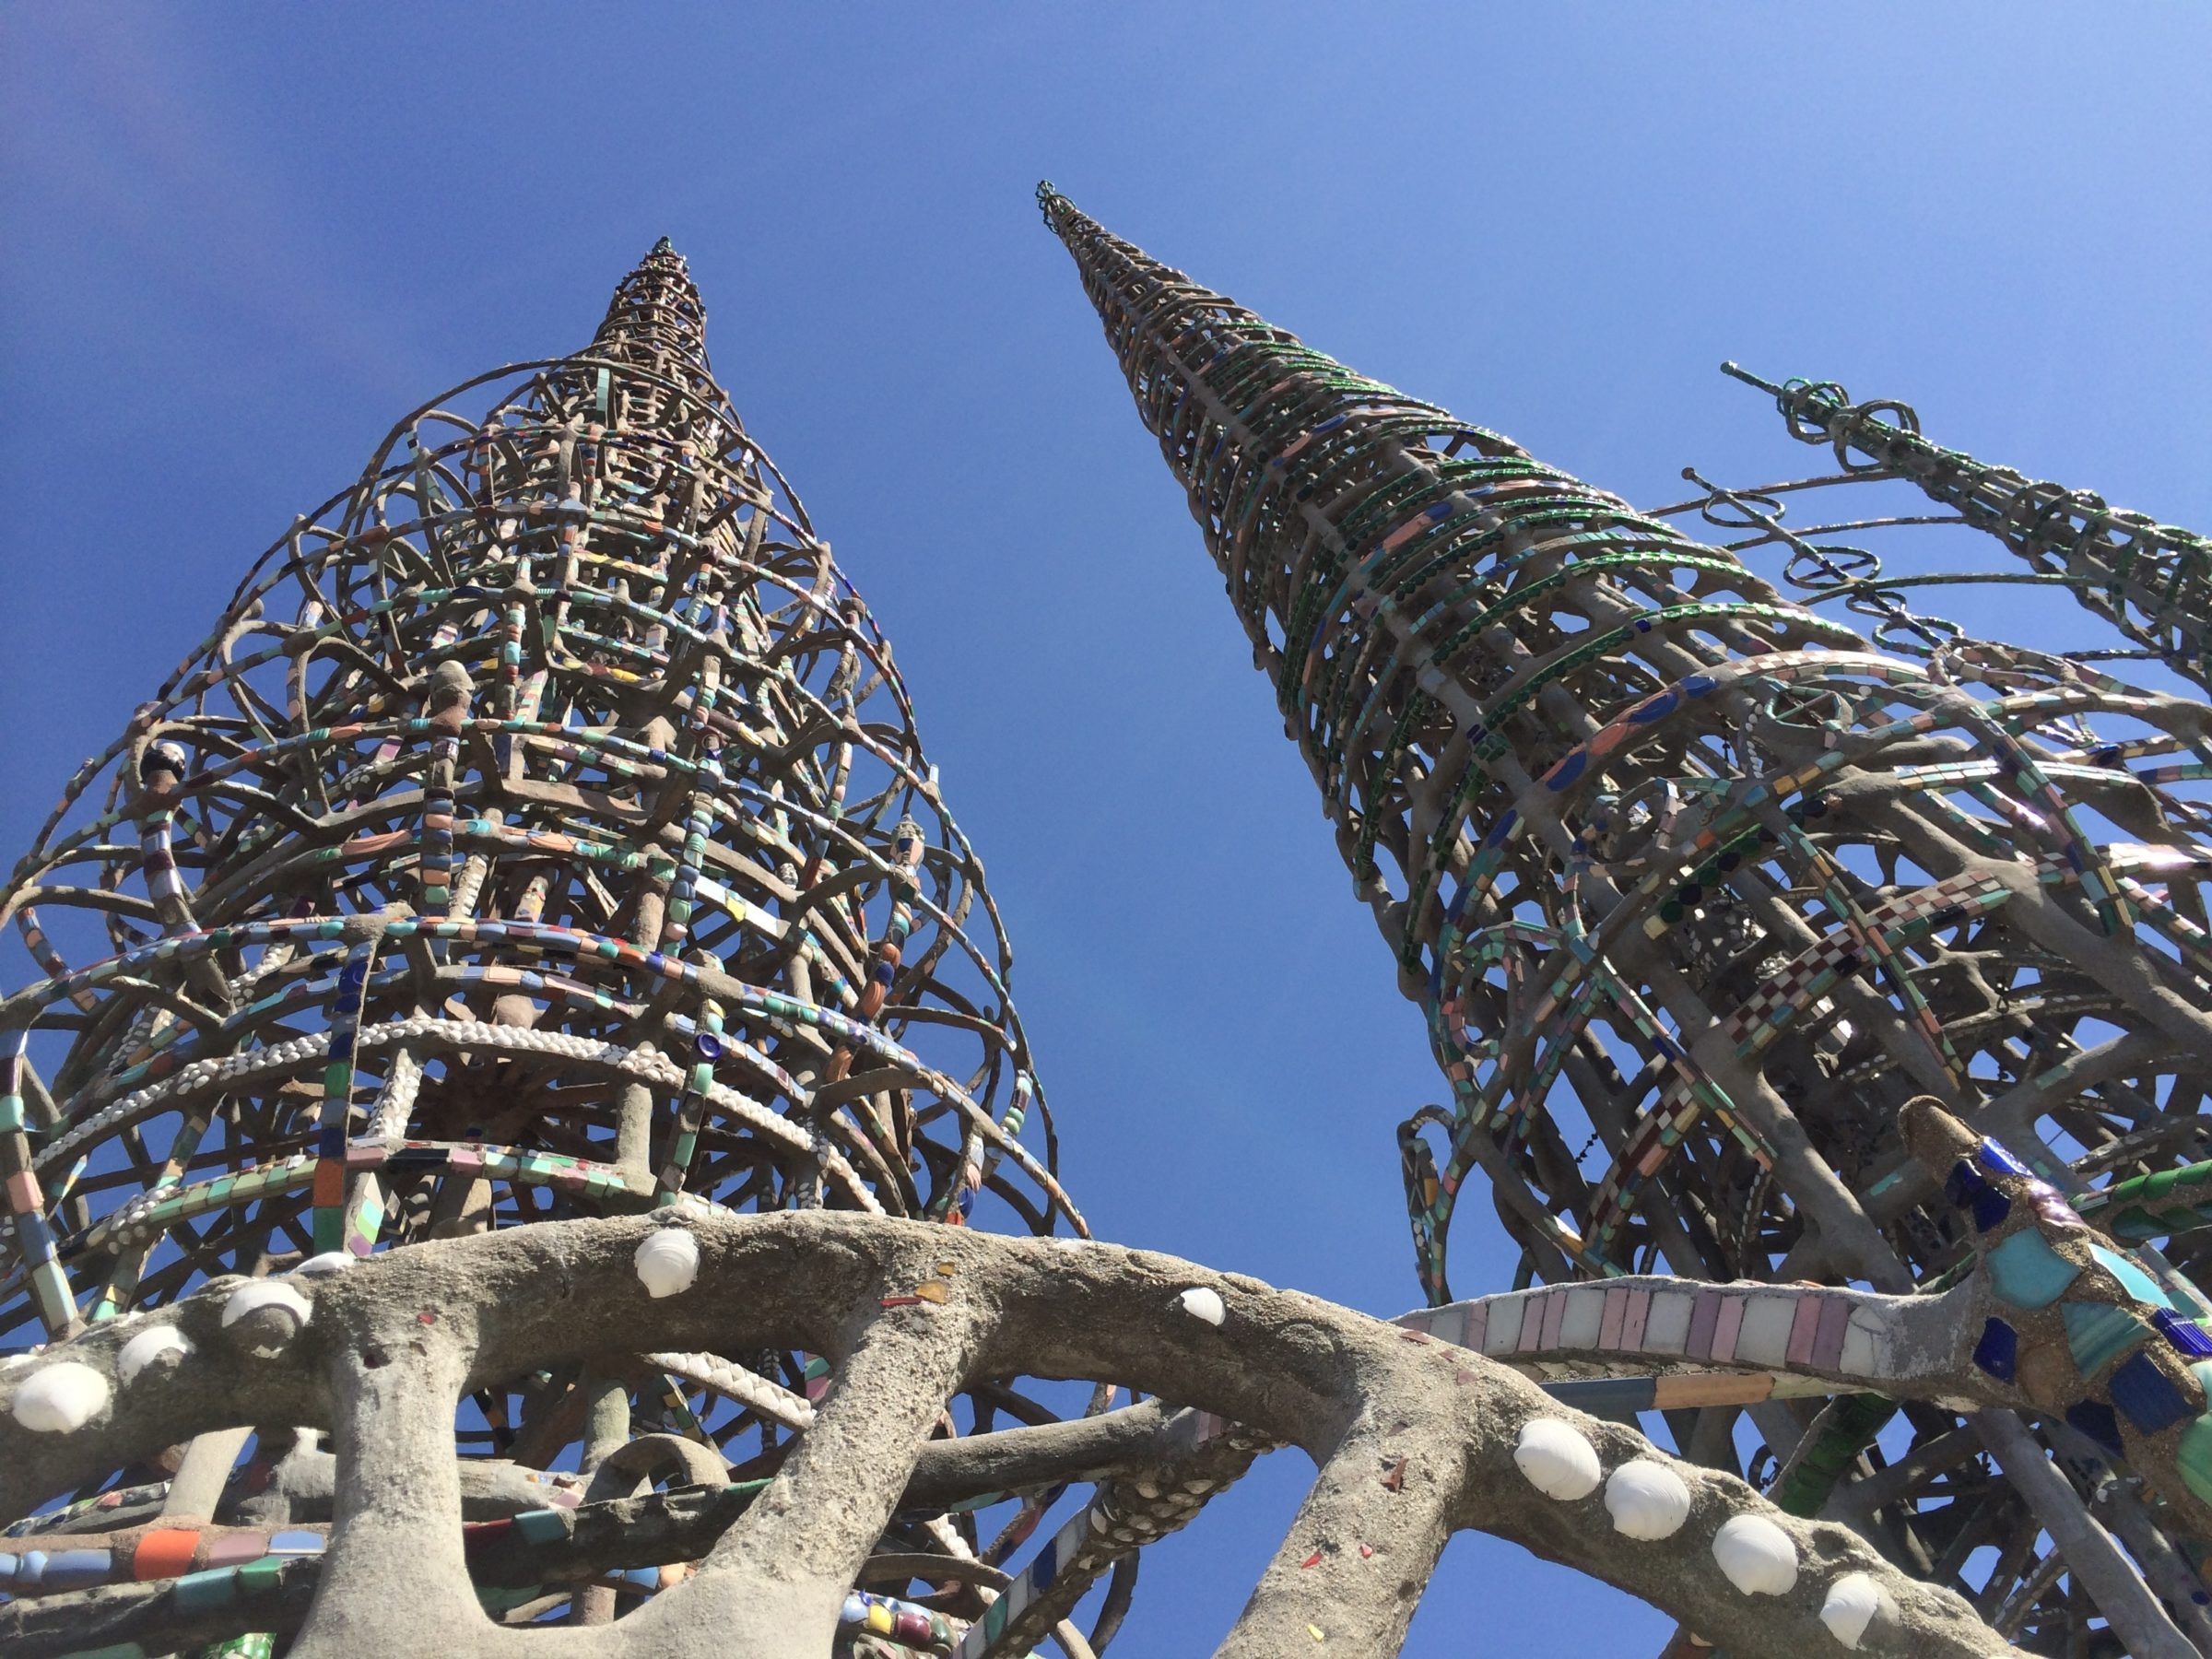 Watts Towers is one of the cool, free things to do in Los Angeles with kids. #losangeles #freelosangeles #thingstodowithkids #southerncalifornia #familytravel